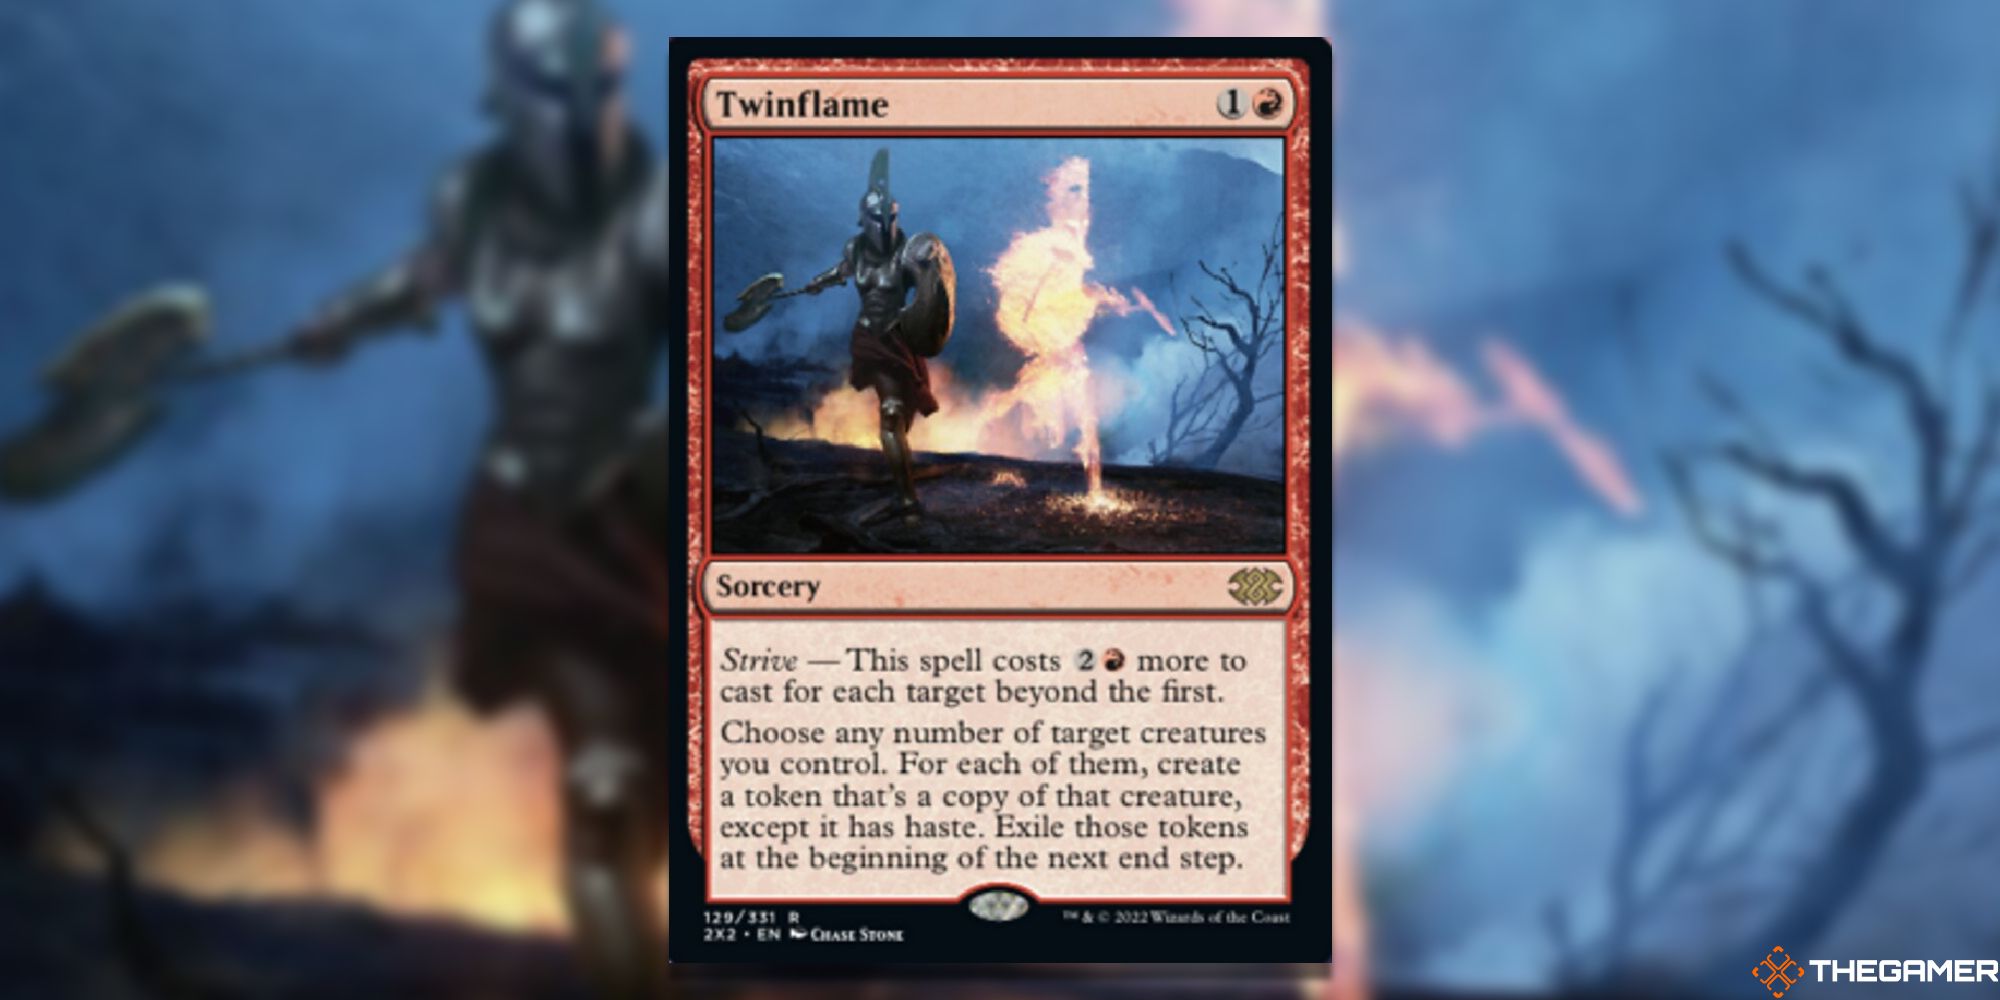 Magic: The Gathering Twinflame full card with background